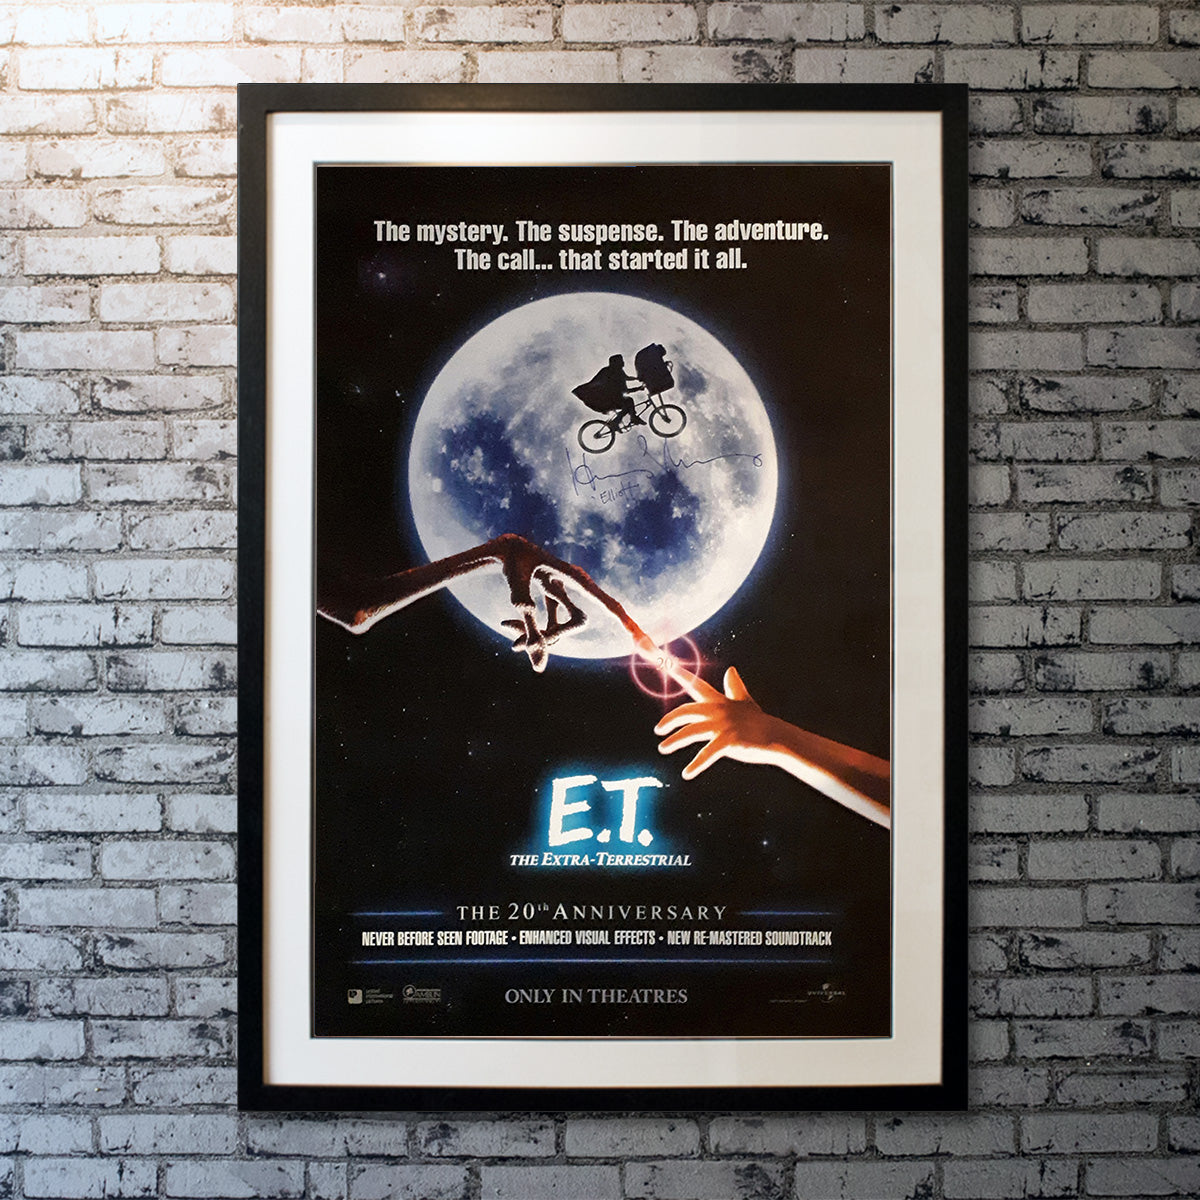 Original Movie Poster of E.t. The Extra-terrestrial (2002R) - Signed By Henry Thomas (elliott)